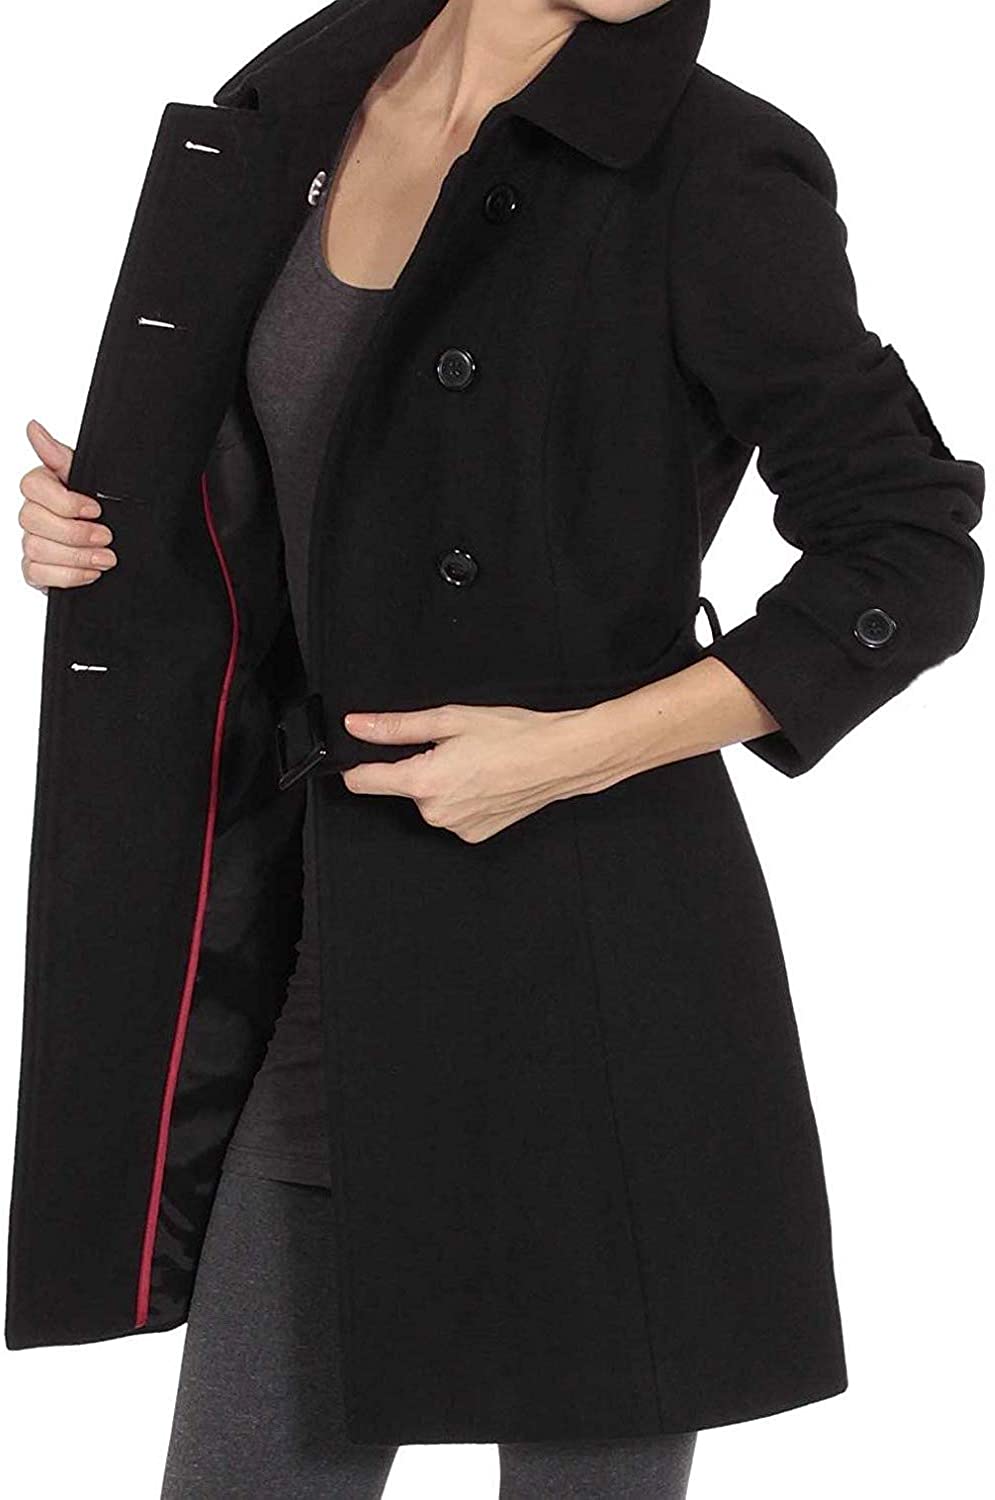 Alpine Swiss Keira Womens Wool Double Breasted Belted Trench Coat | eBay